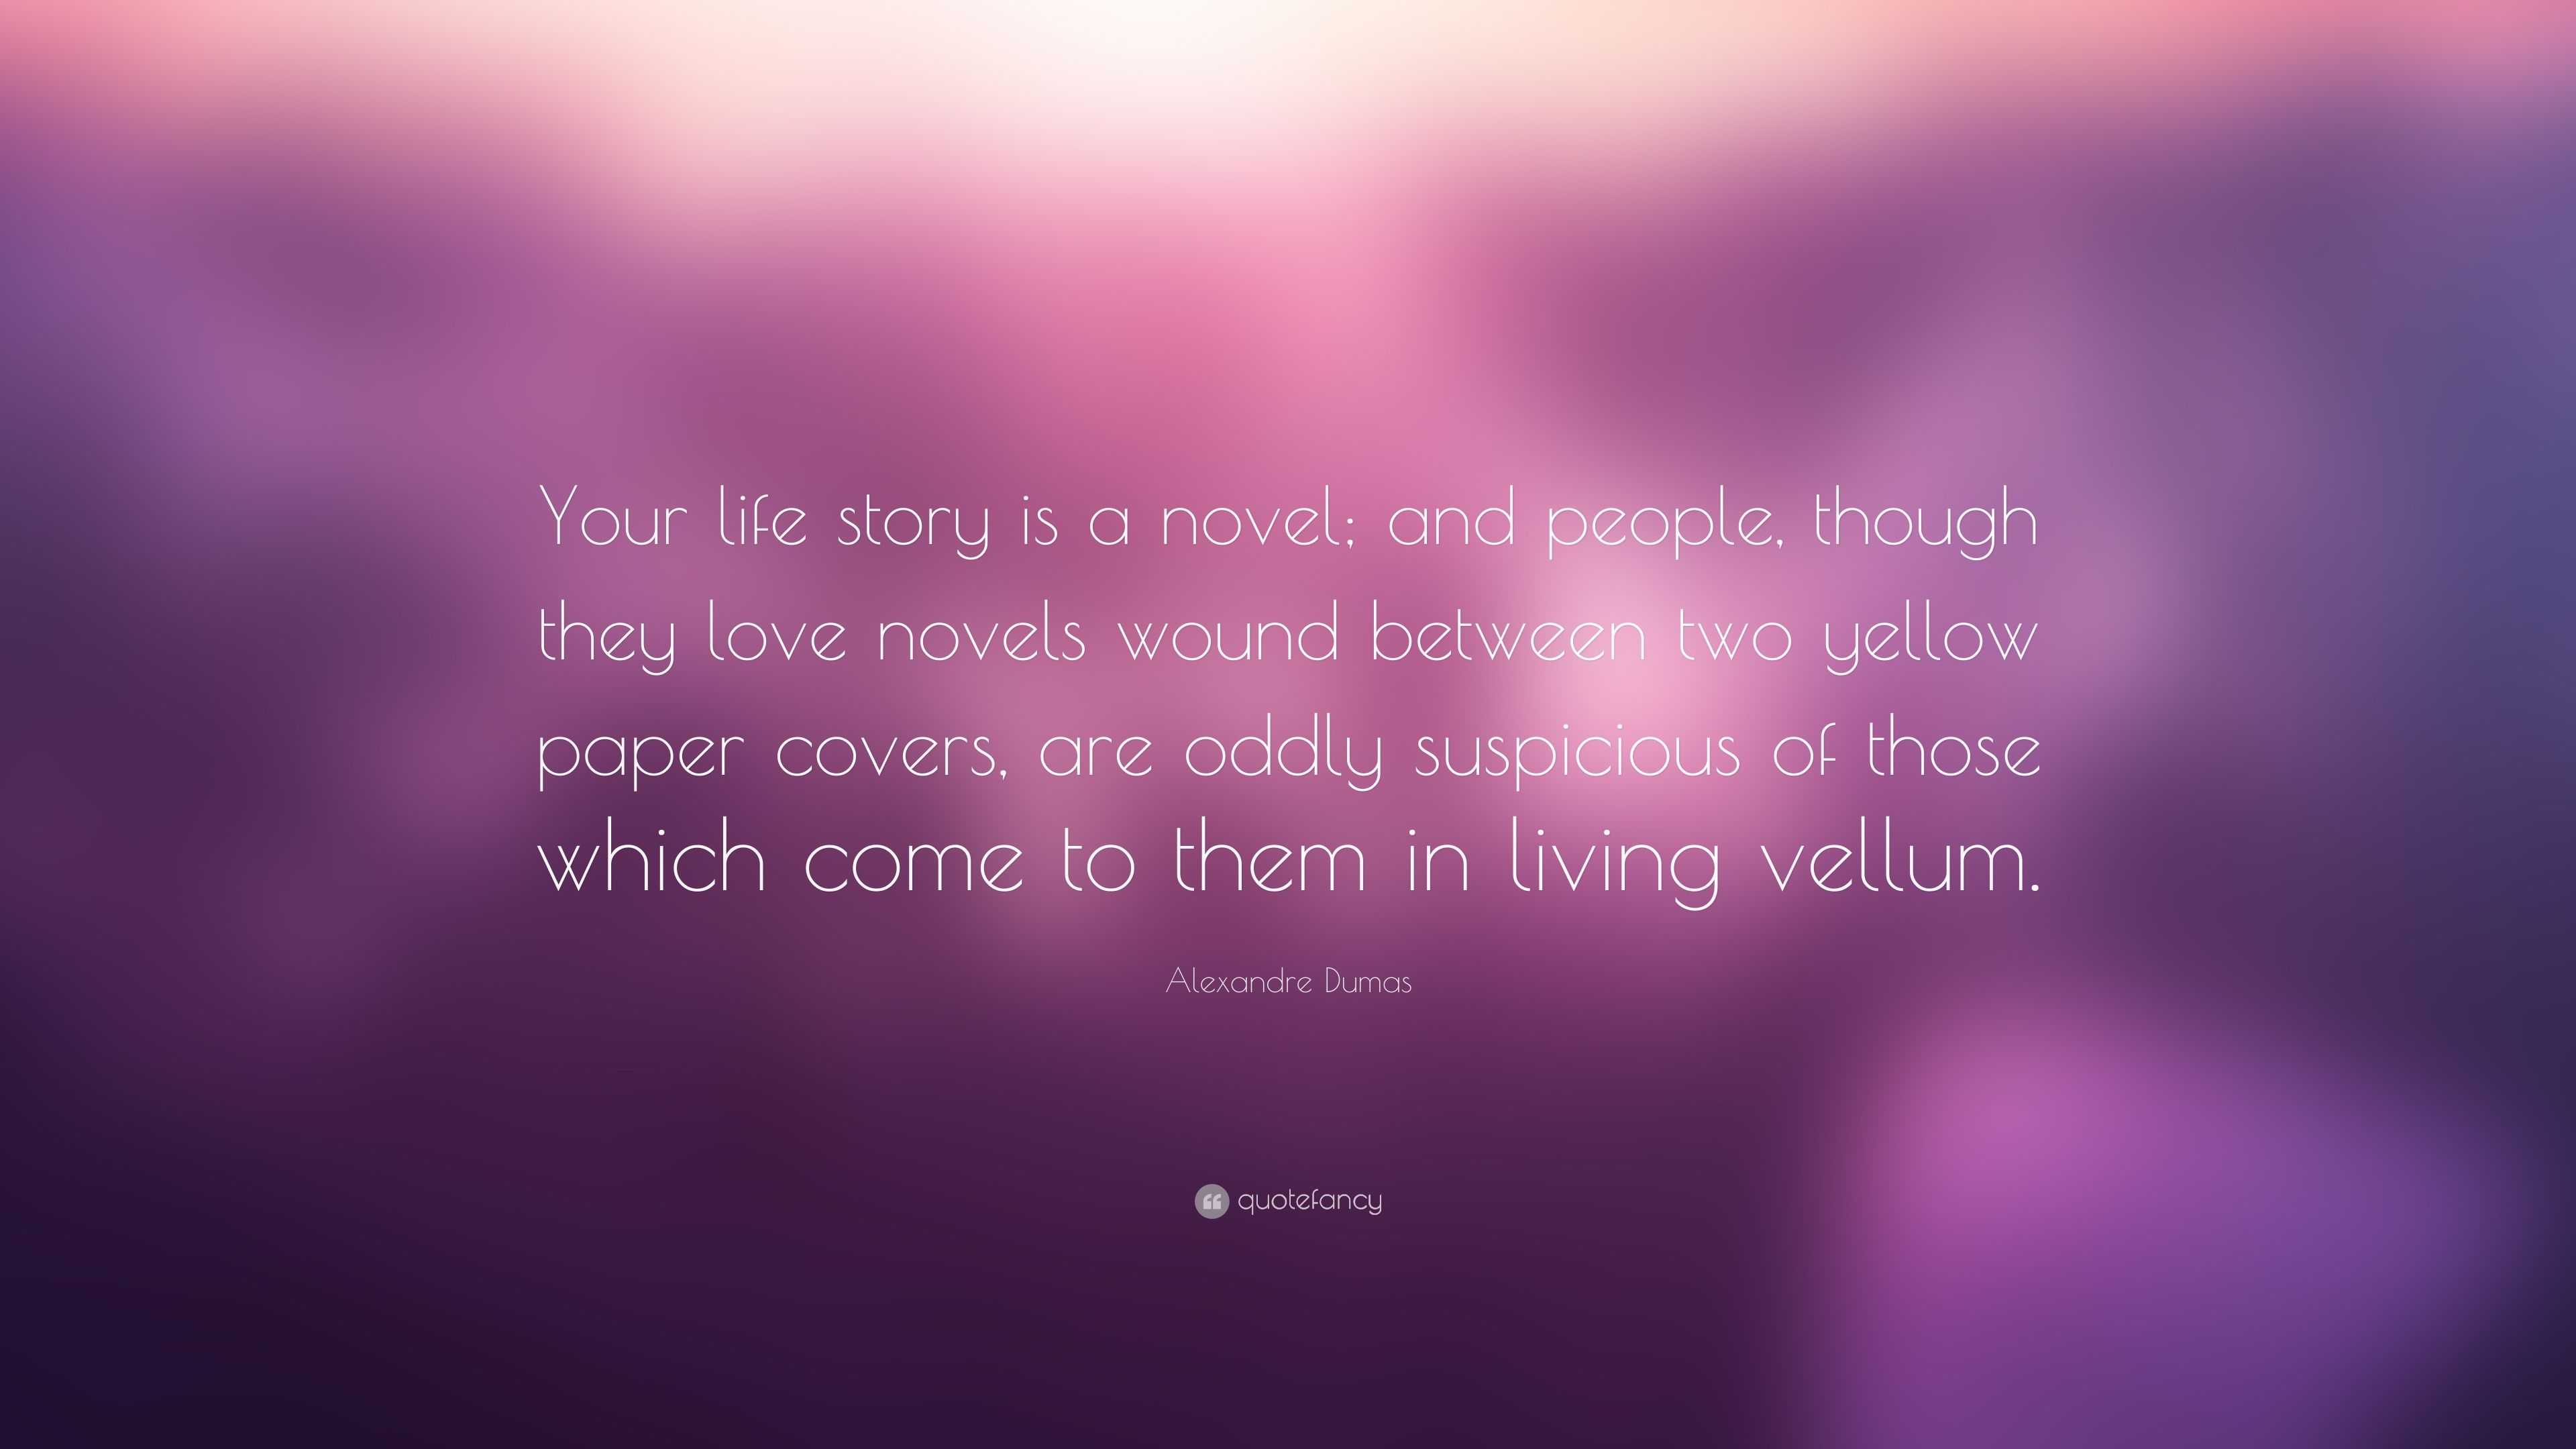 Alexandre Dumas Quote: “Your life story is a novel; and people, though ...